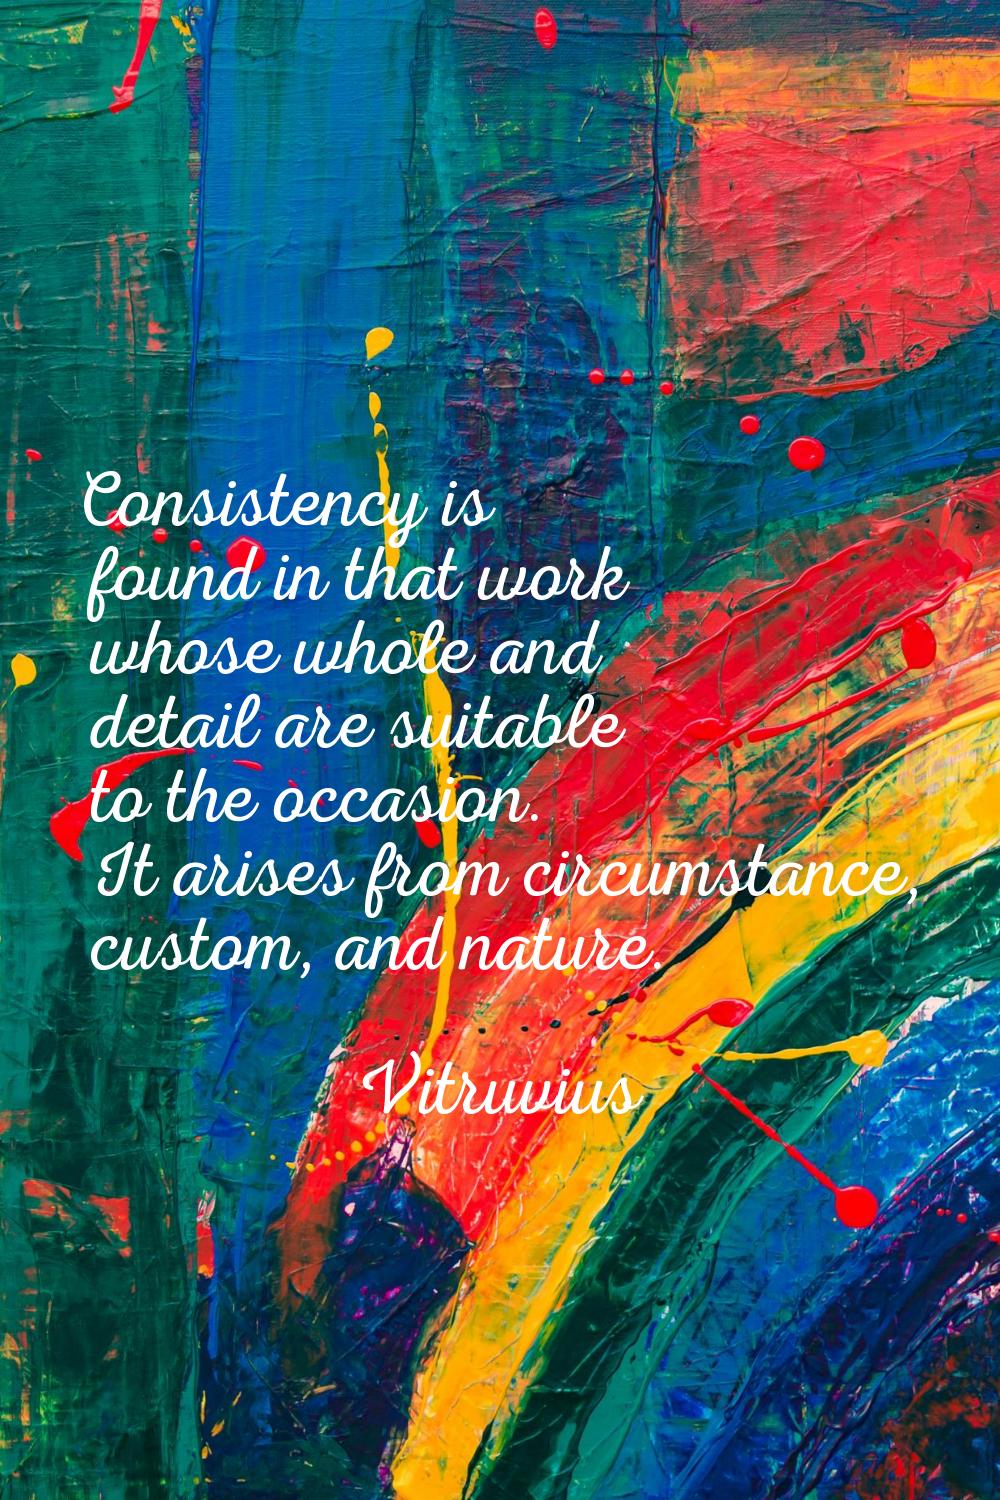 Consistency is found in that work whose whole and detail are suitable to the occasion. It arises fr